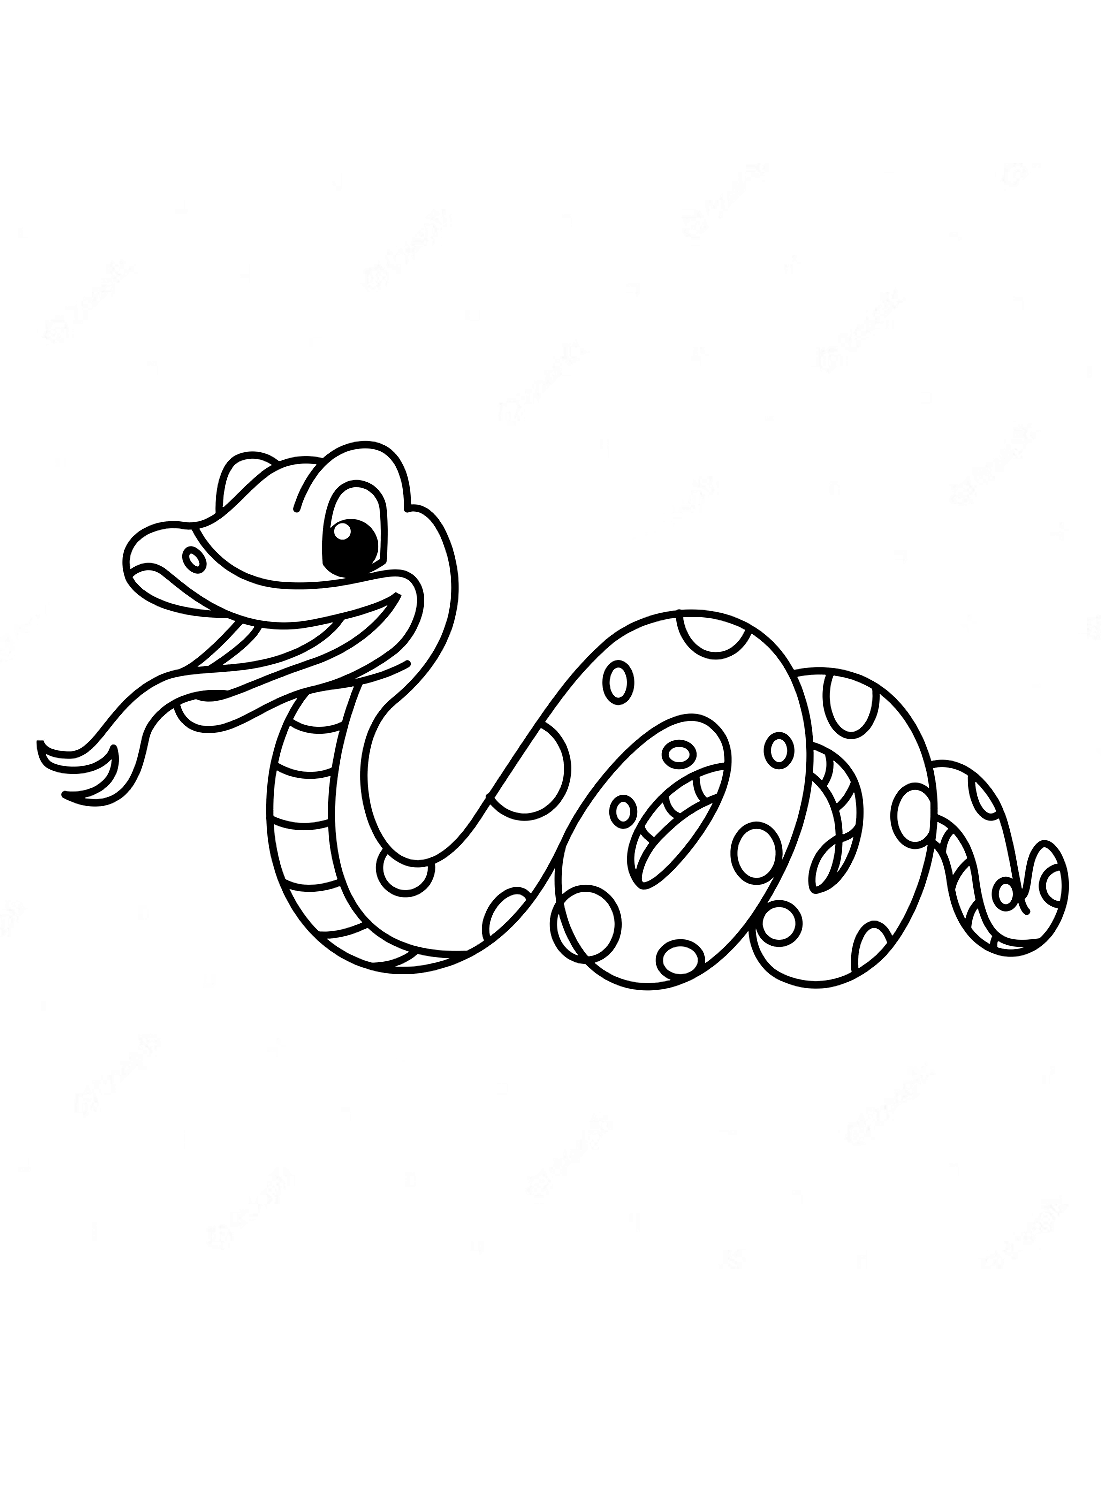 Cute snake coloring page from Snake